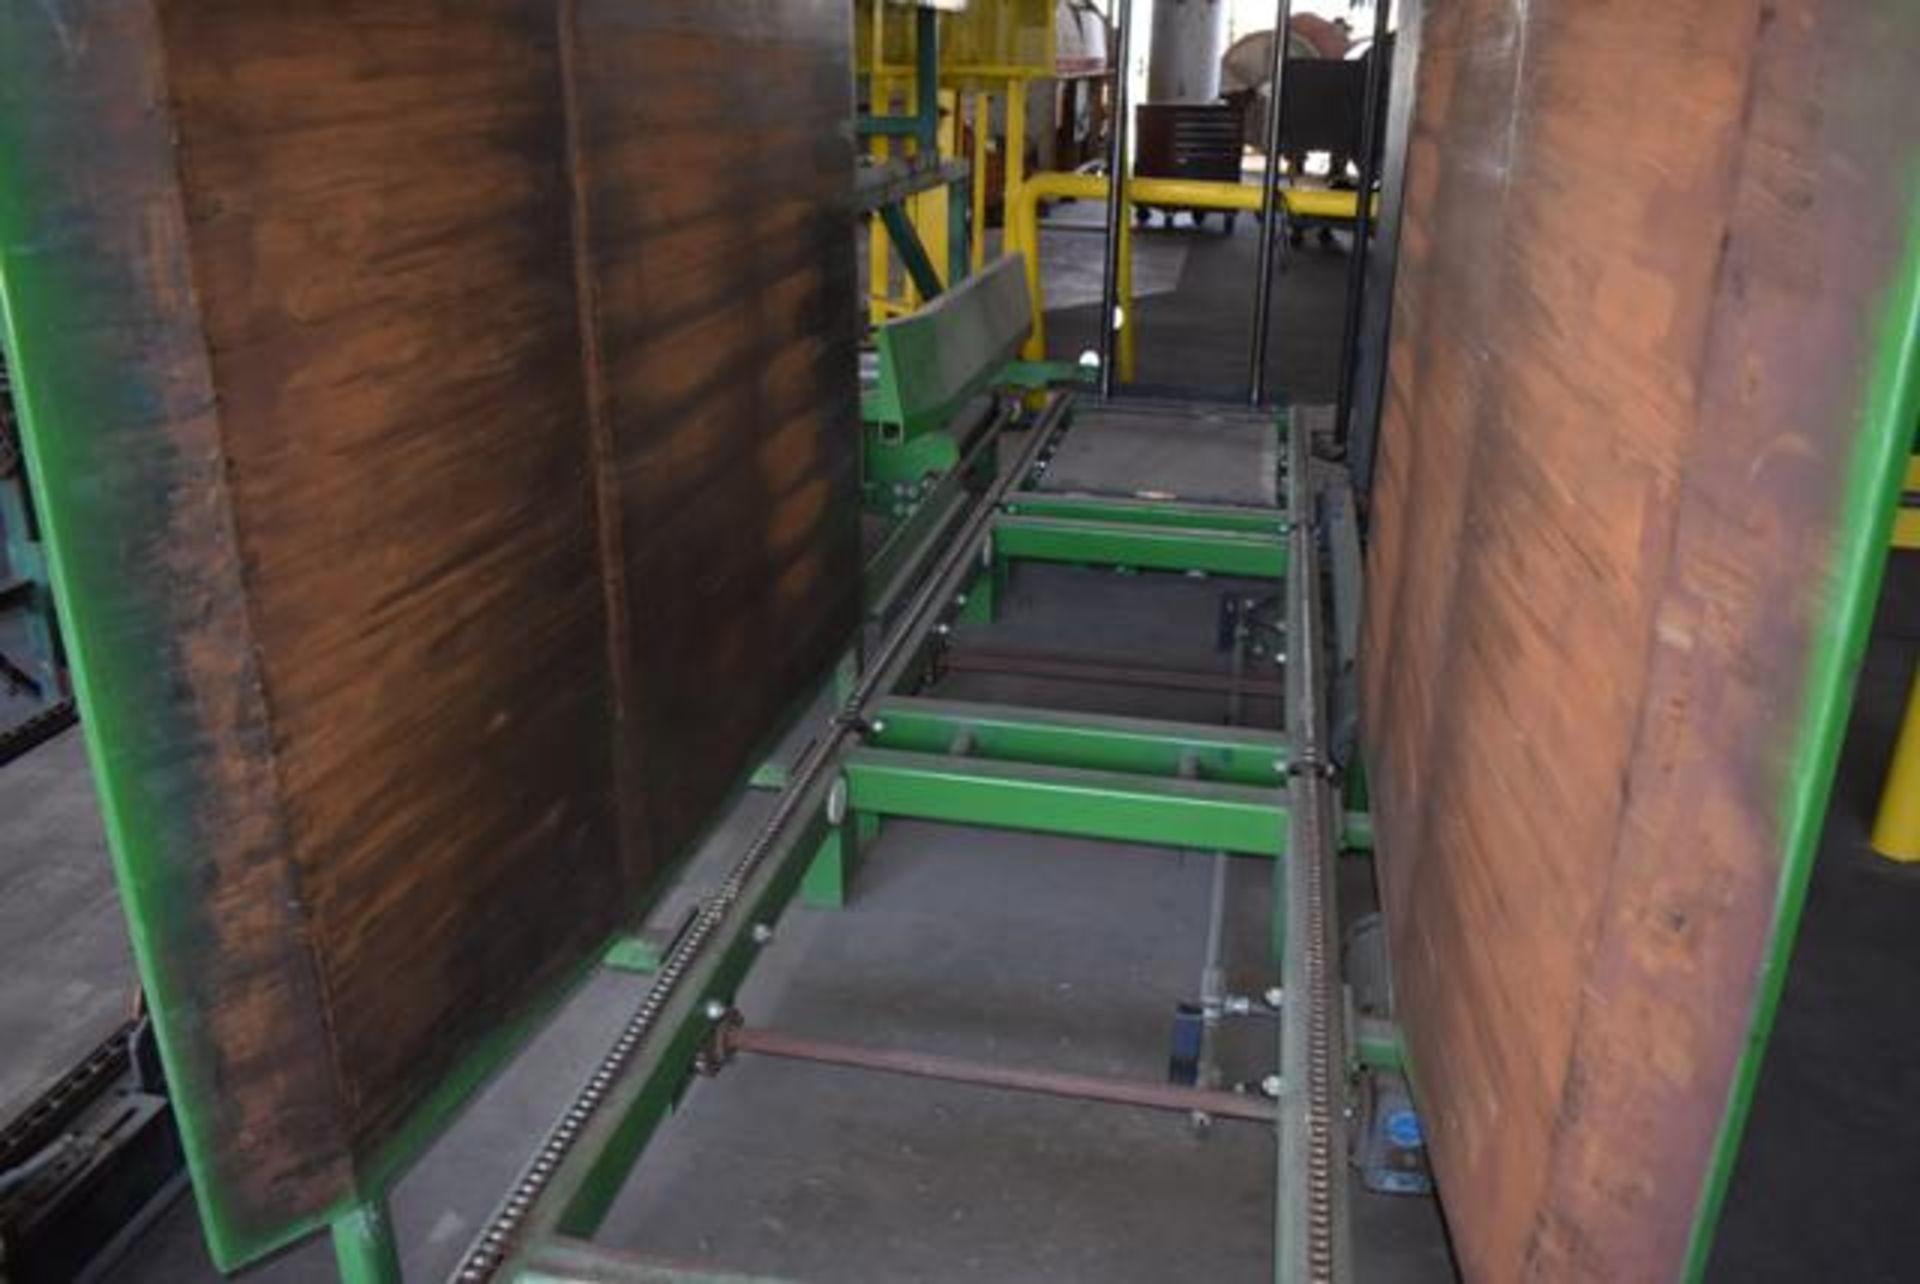 Pallet Disbursing 6-Bay Palletizing System, ID System 5, Serves Stackers Lines CA, CB, CE, CD, CF, - Image 2 of 3